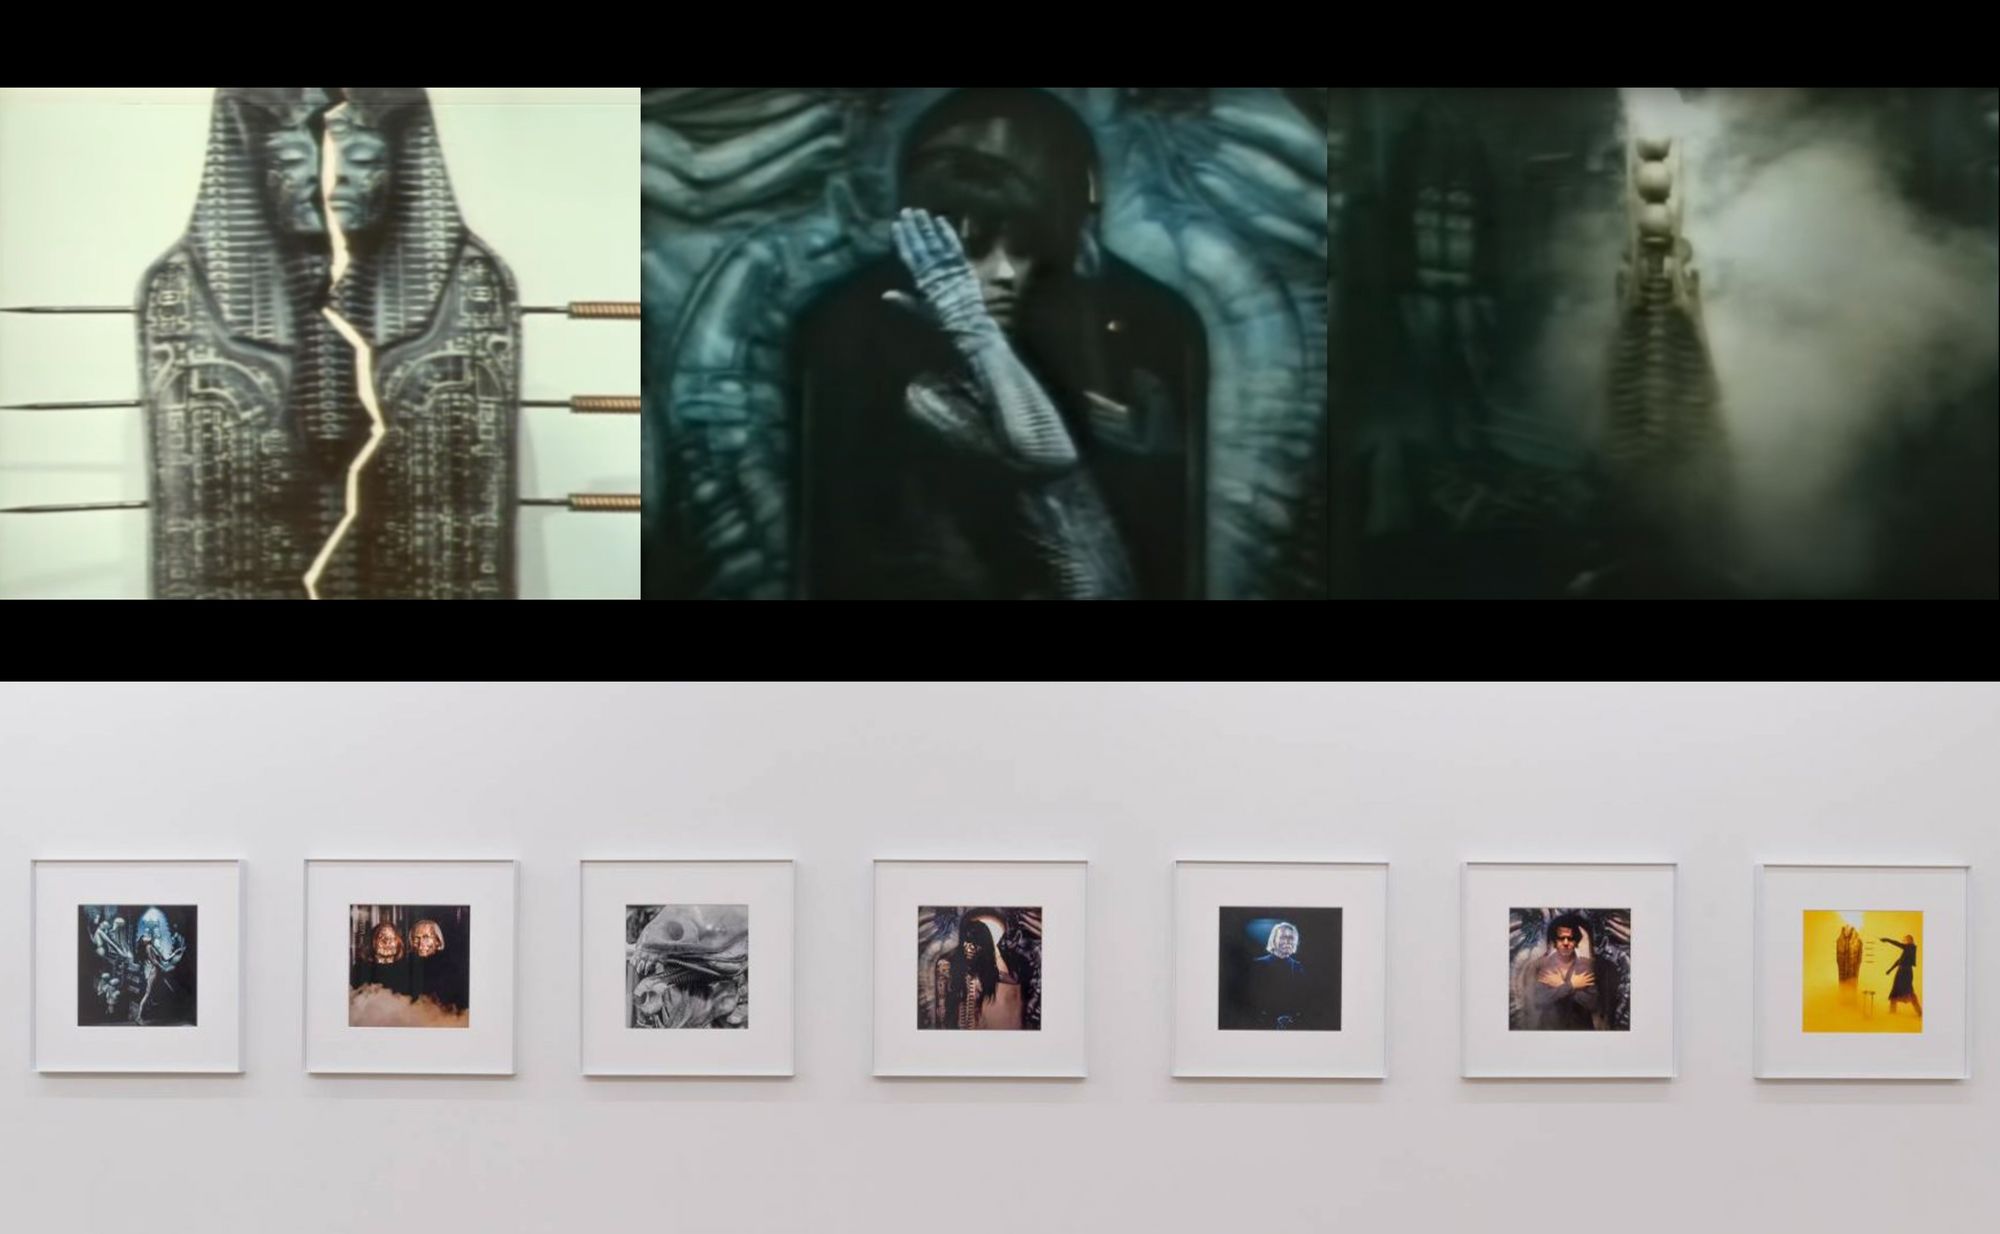 Three stills from music videos for Debbie Harry above a row of framed photographs from the video shoot.